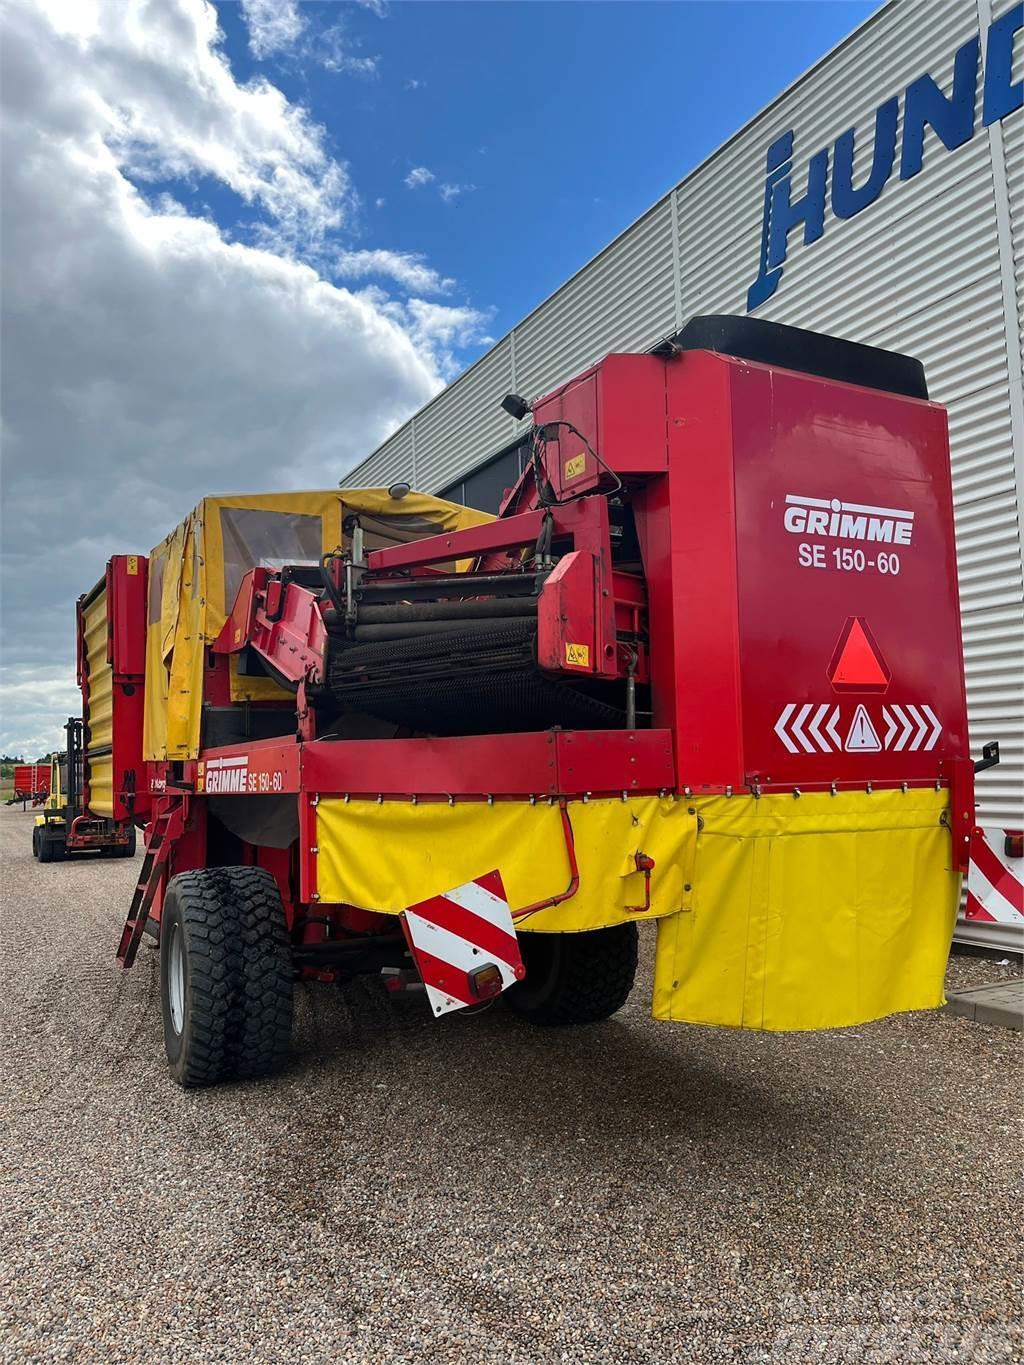 Grimme SE150-60 Potato harvesters and diggers